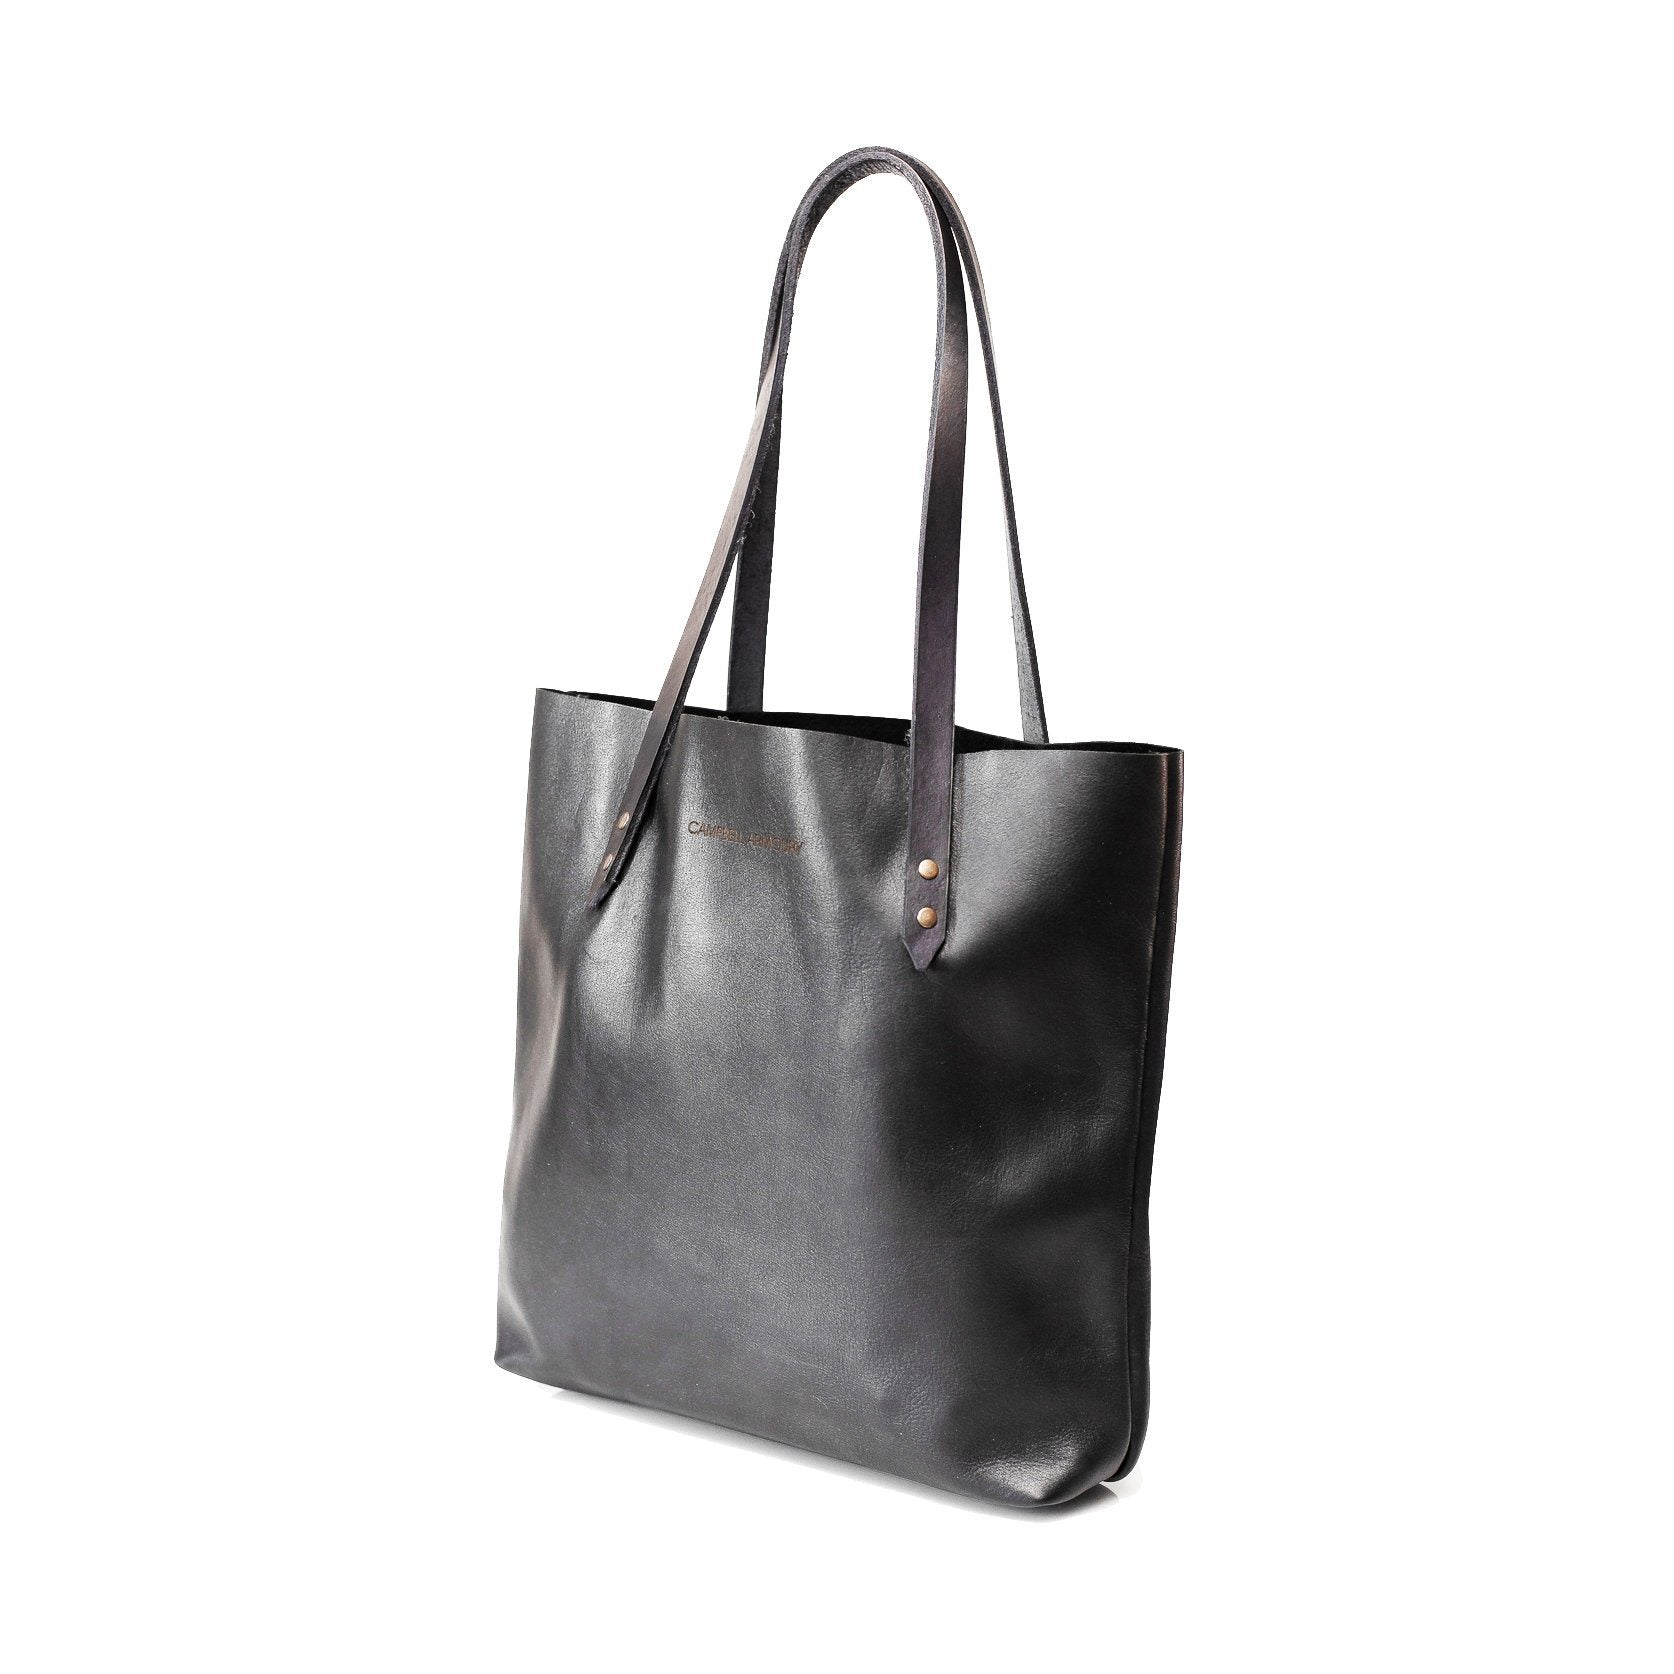 Campbell Armoury Leather Soft Tote Bag clothing & accessories Campbell Armoury black